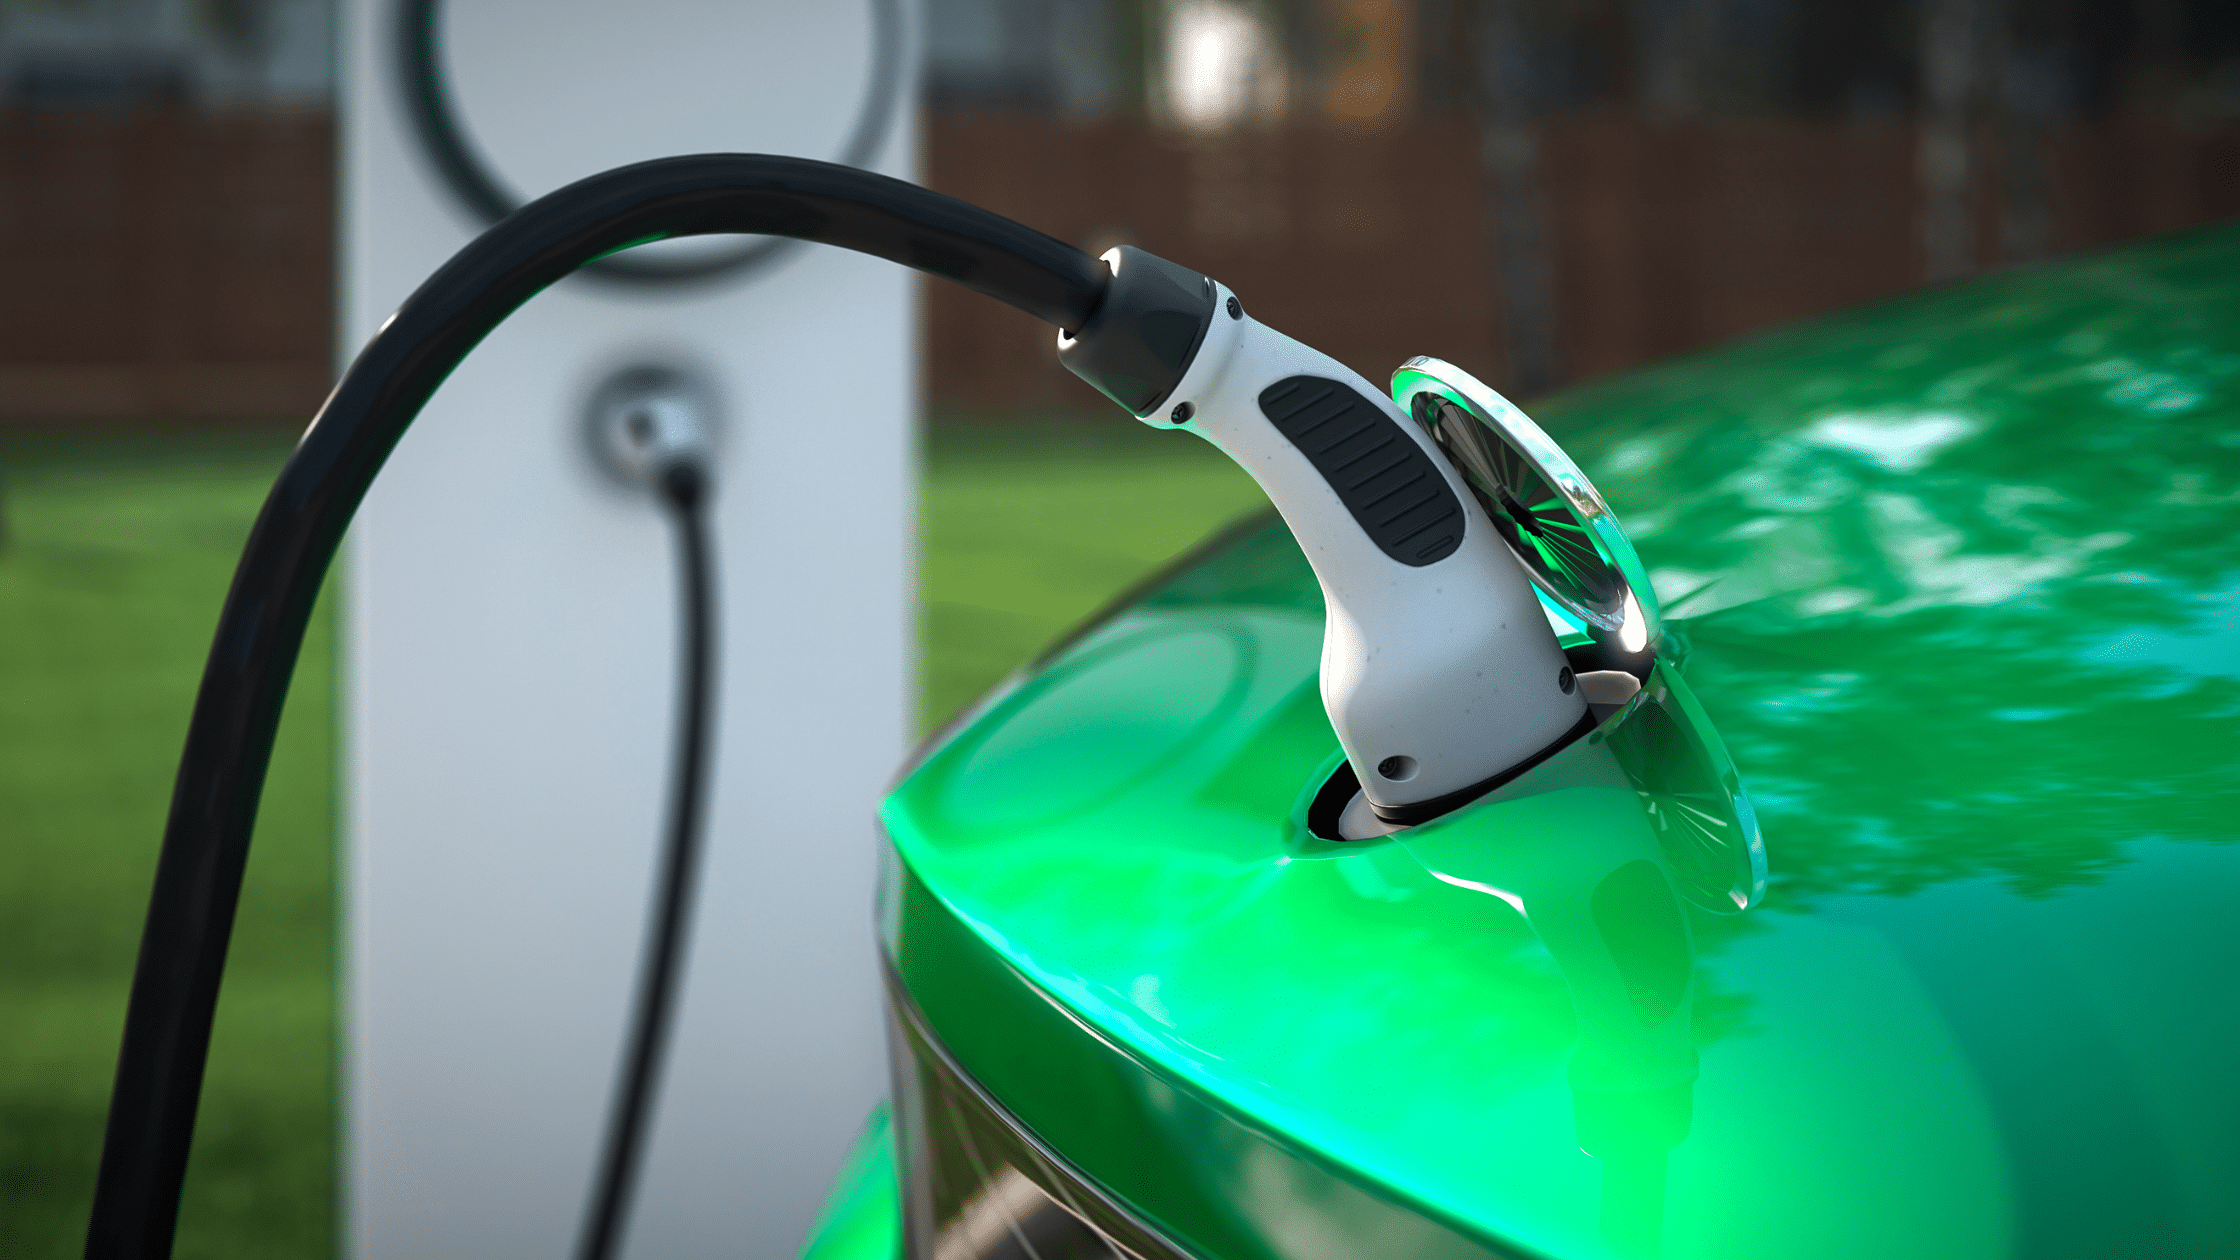 SWTCH Raises $13 Million to Provide Equitable Access to Electric Vehicle Charging Infrastructure in Communities Across North America